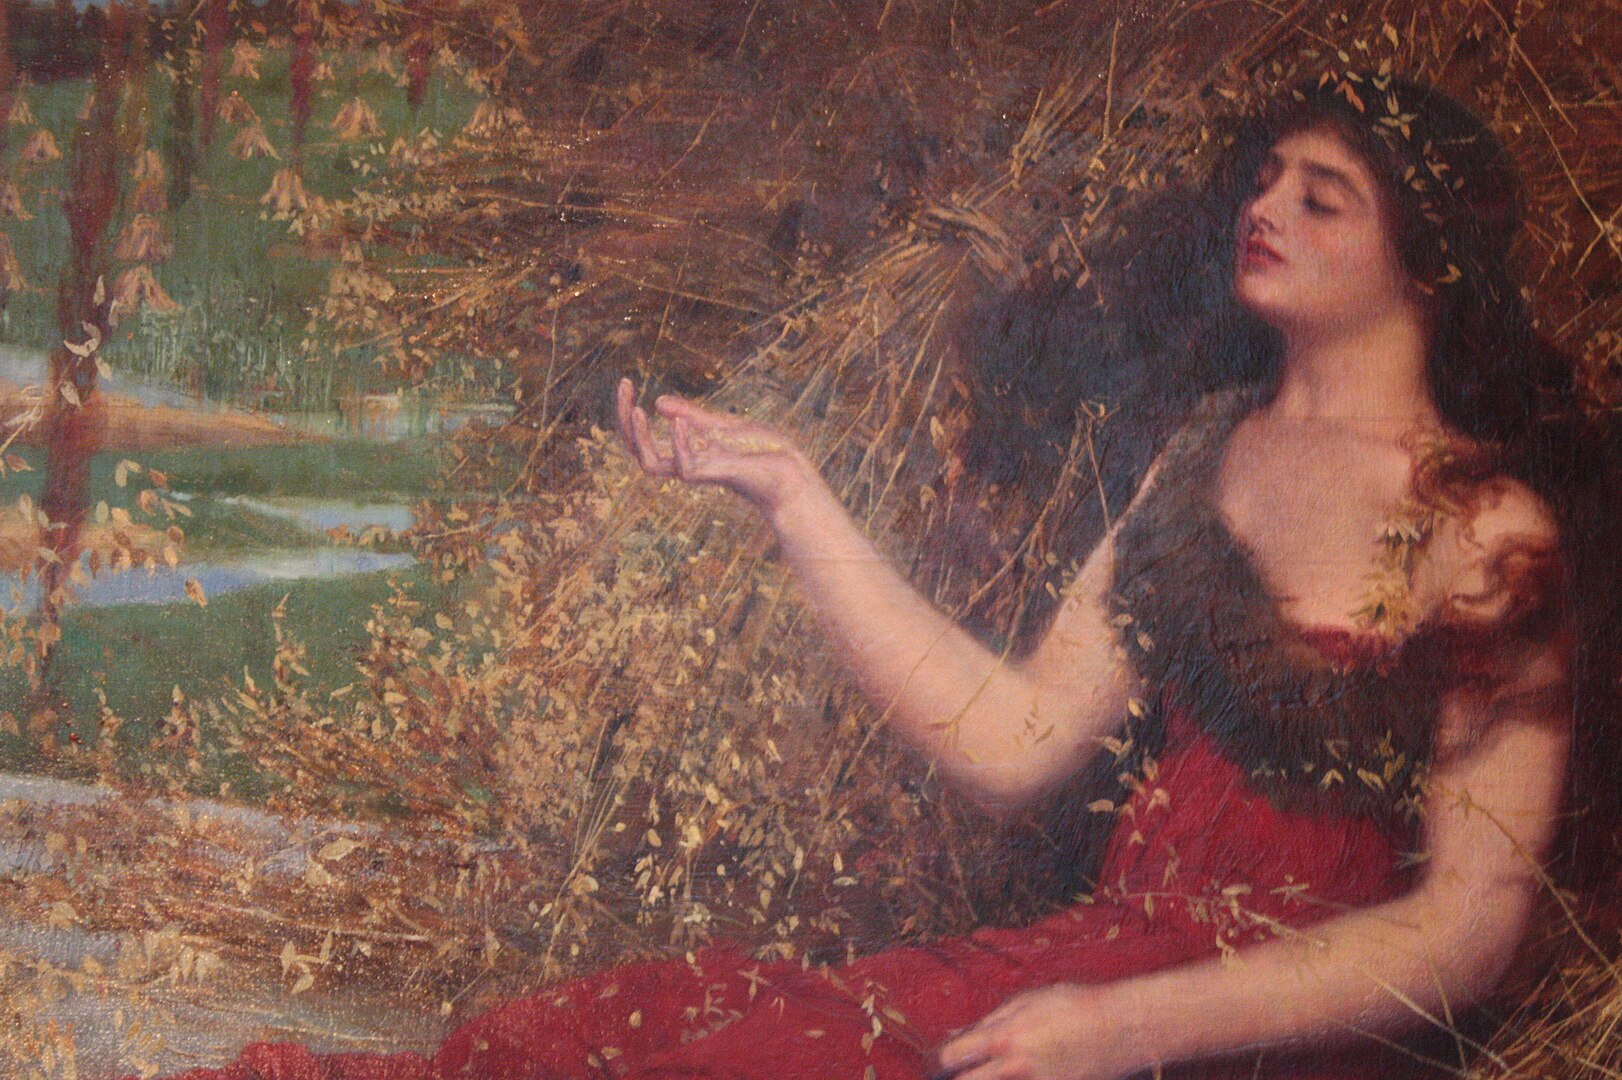 A woman with her eyes closed and her right arm lifted leans against foliage in an autumn landscape.